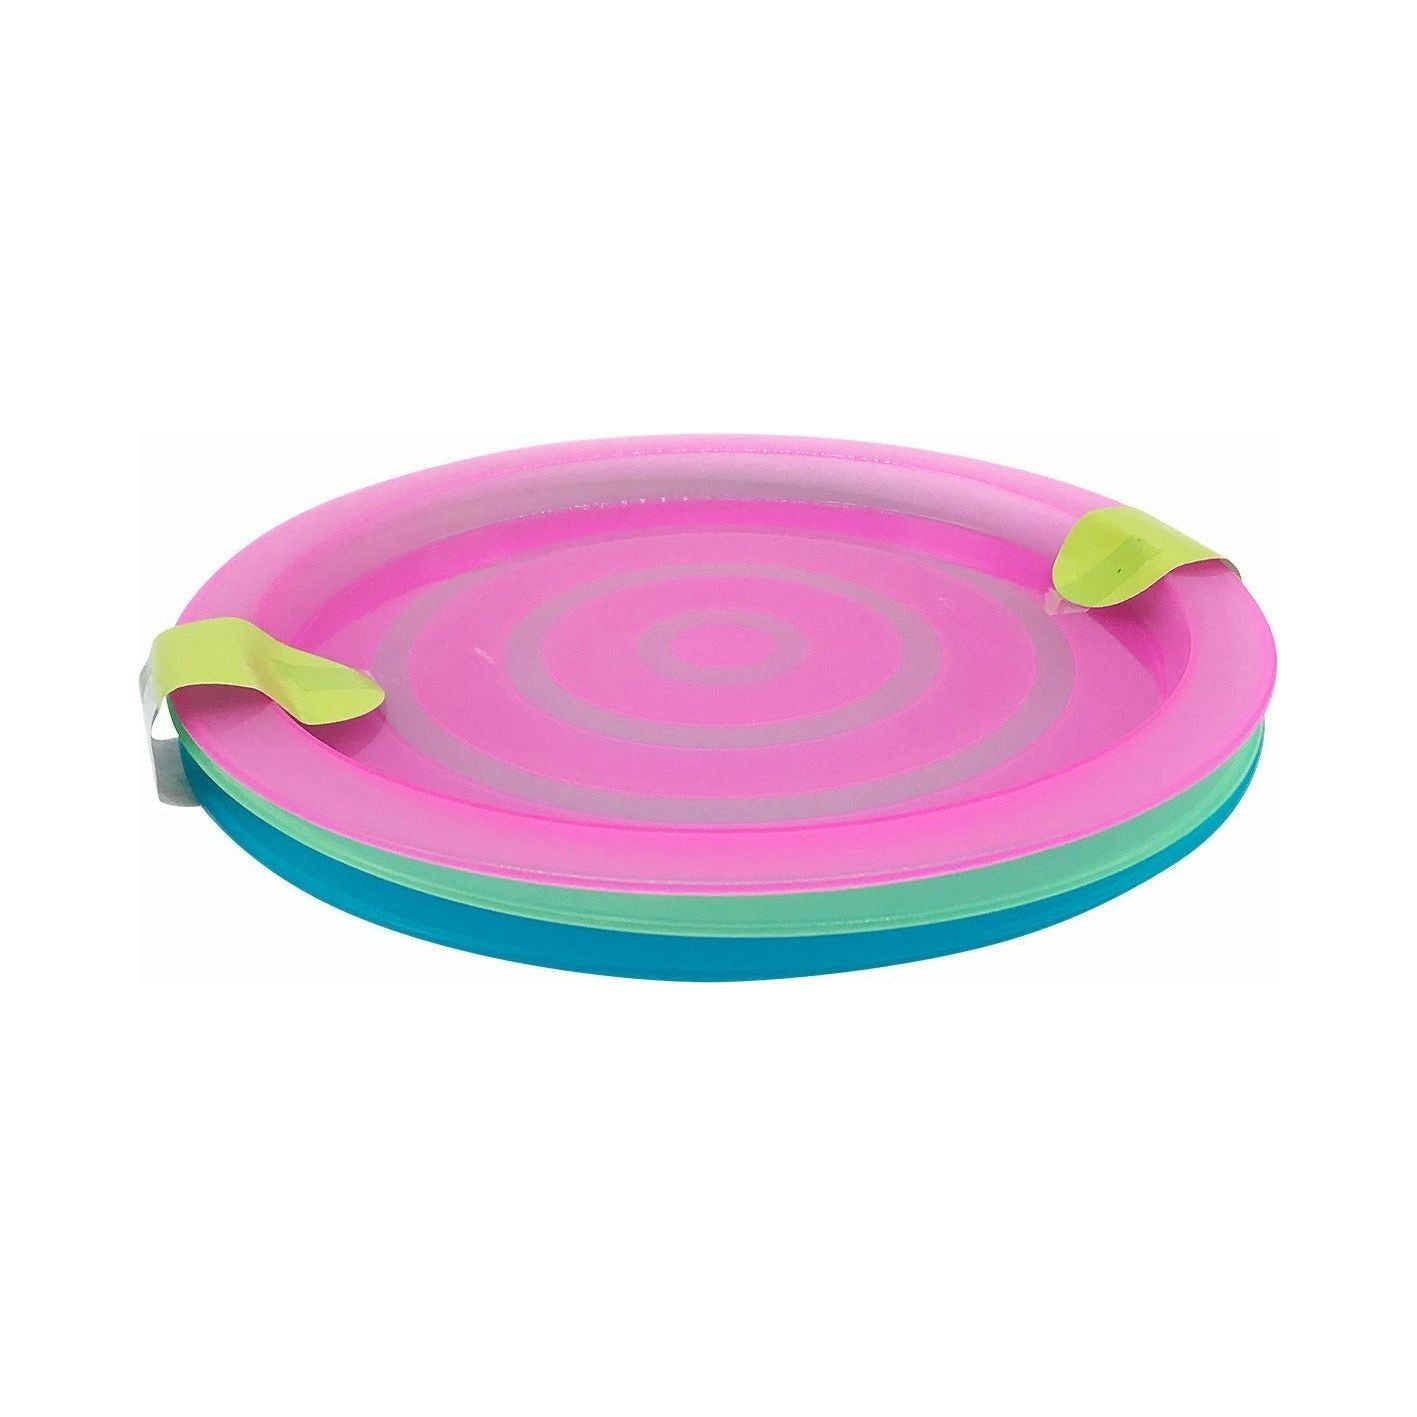 Plastic Reusable Coloured Plates - 3 Pack 1 Piece - Dollars and Sense